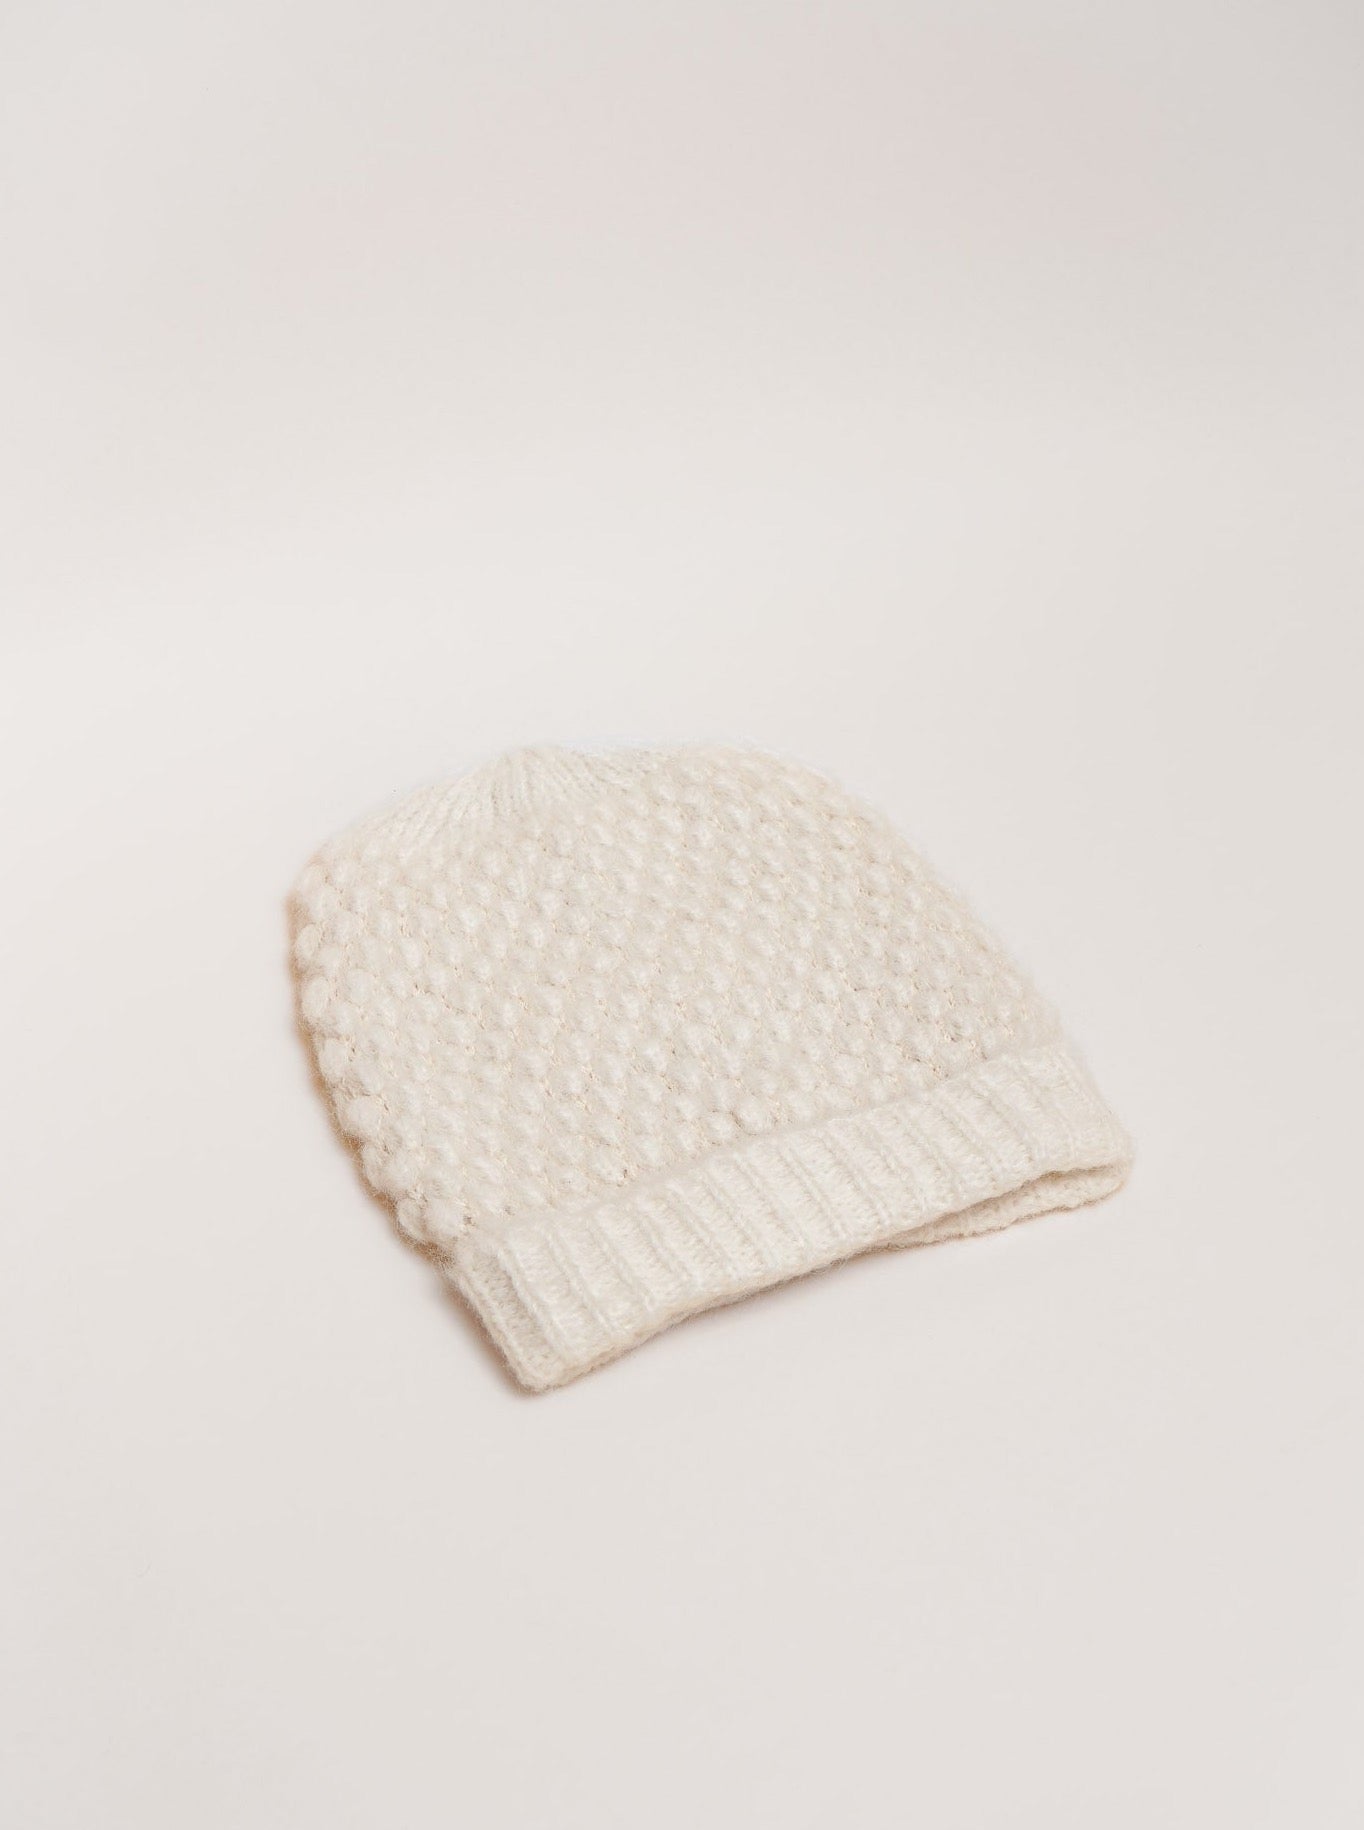 A Heritage Bauble Beanie - Ivory from Peru, showcased on a plain white background.